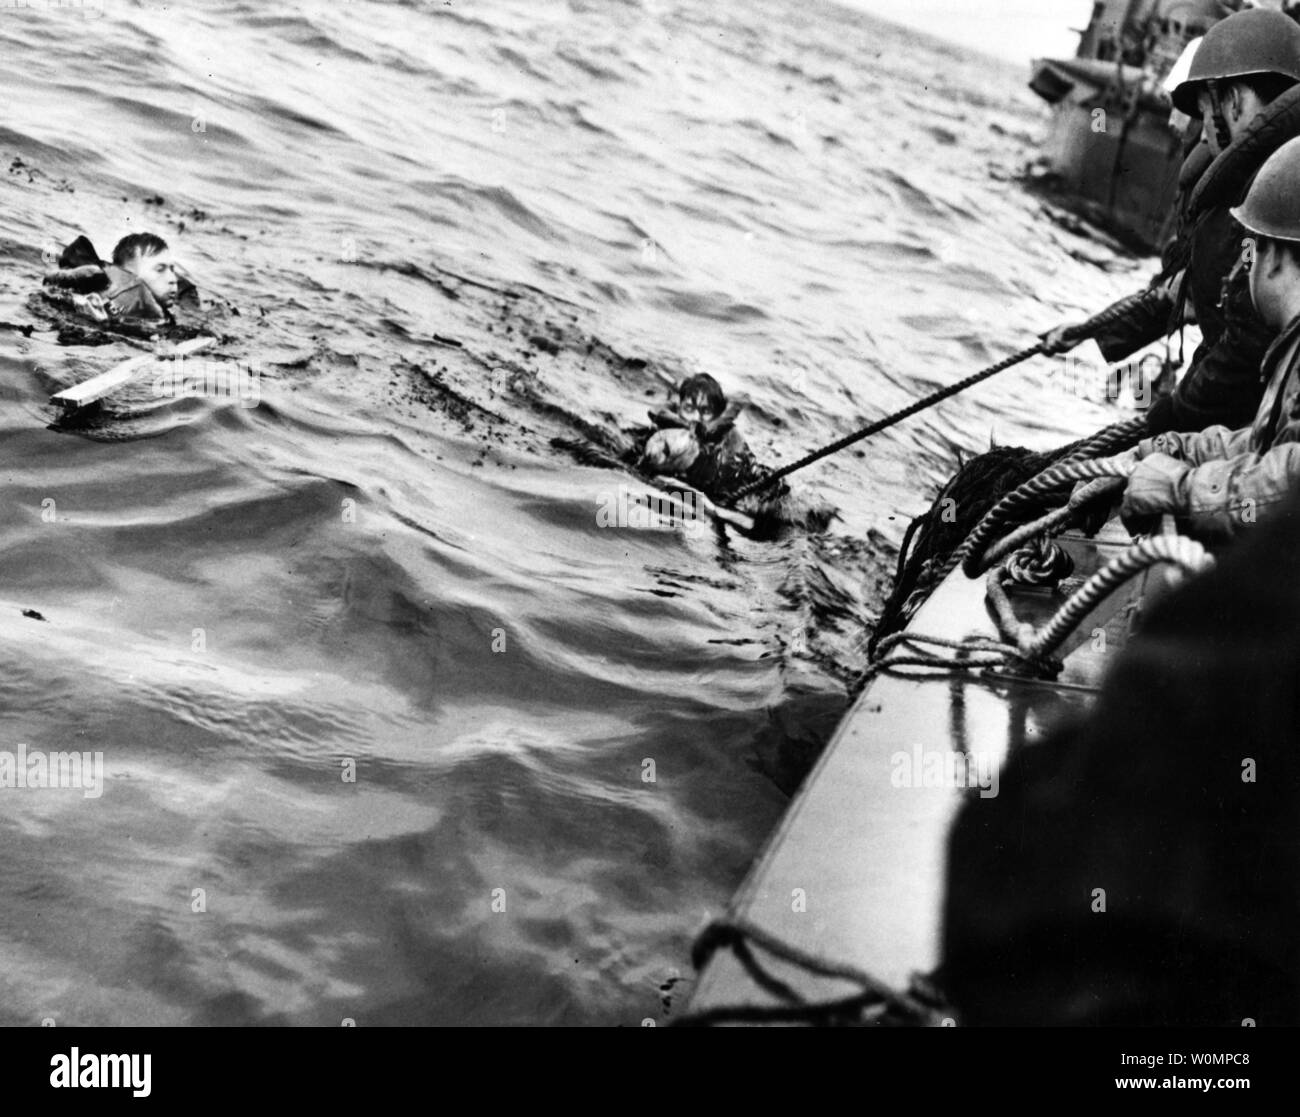 A U.S. Coast Guard boat rescues two survivors from the waters off Normandy, France, after their ship was hit on June 6, 1944, during the Allied invasion of Normandy. The ship ahead of this boat appears to be a minesweeper. Photo by U.S. Coast Guard/National Archives/UPI Stock Photo